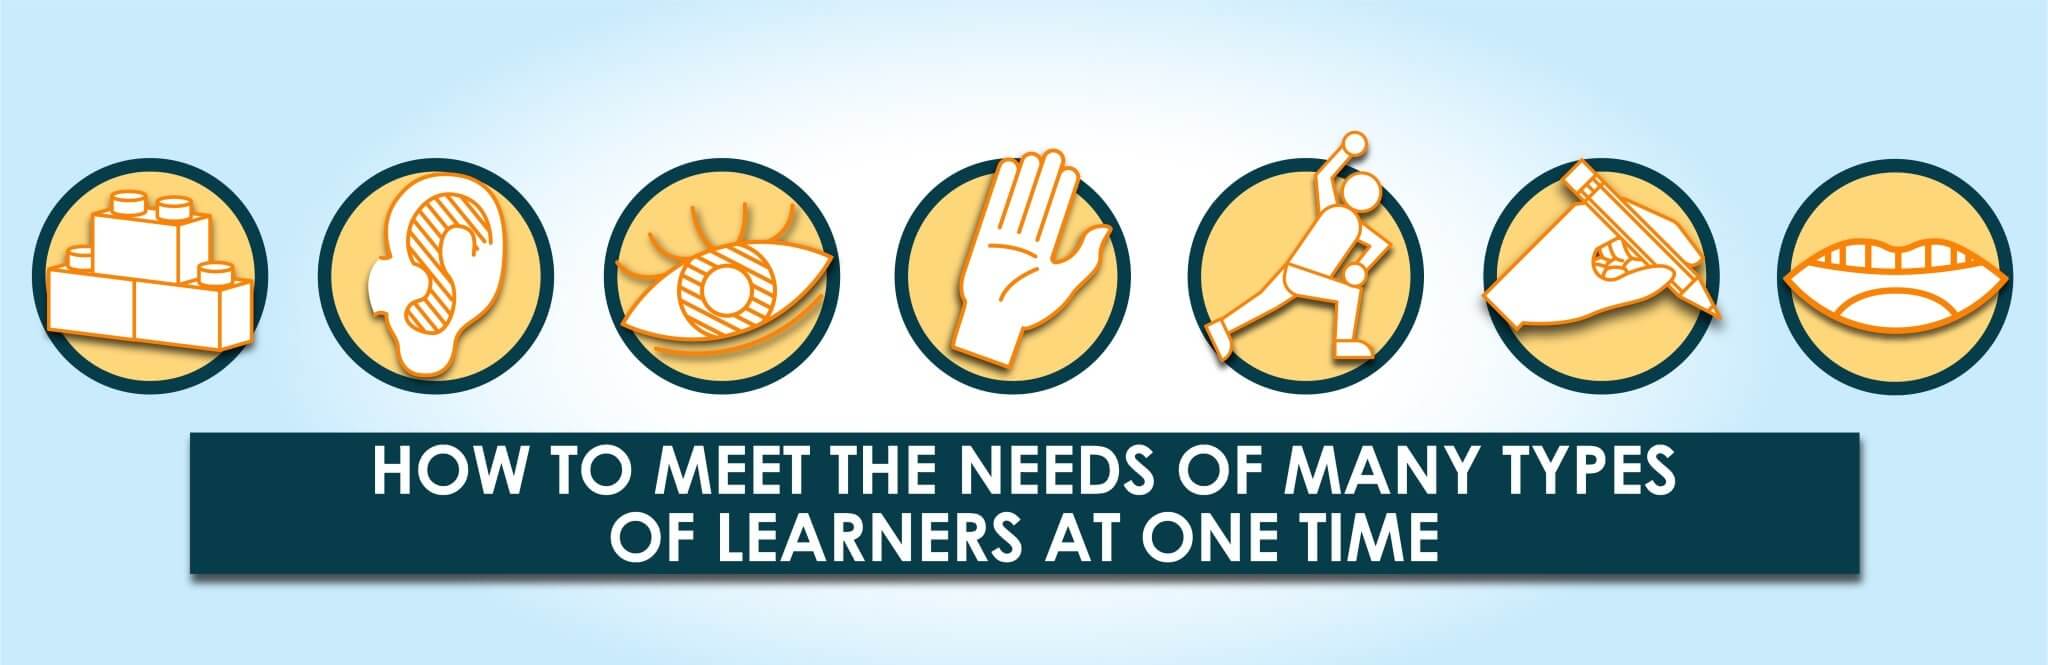 How to Meet the Needs of Many Types of Learners at One Time